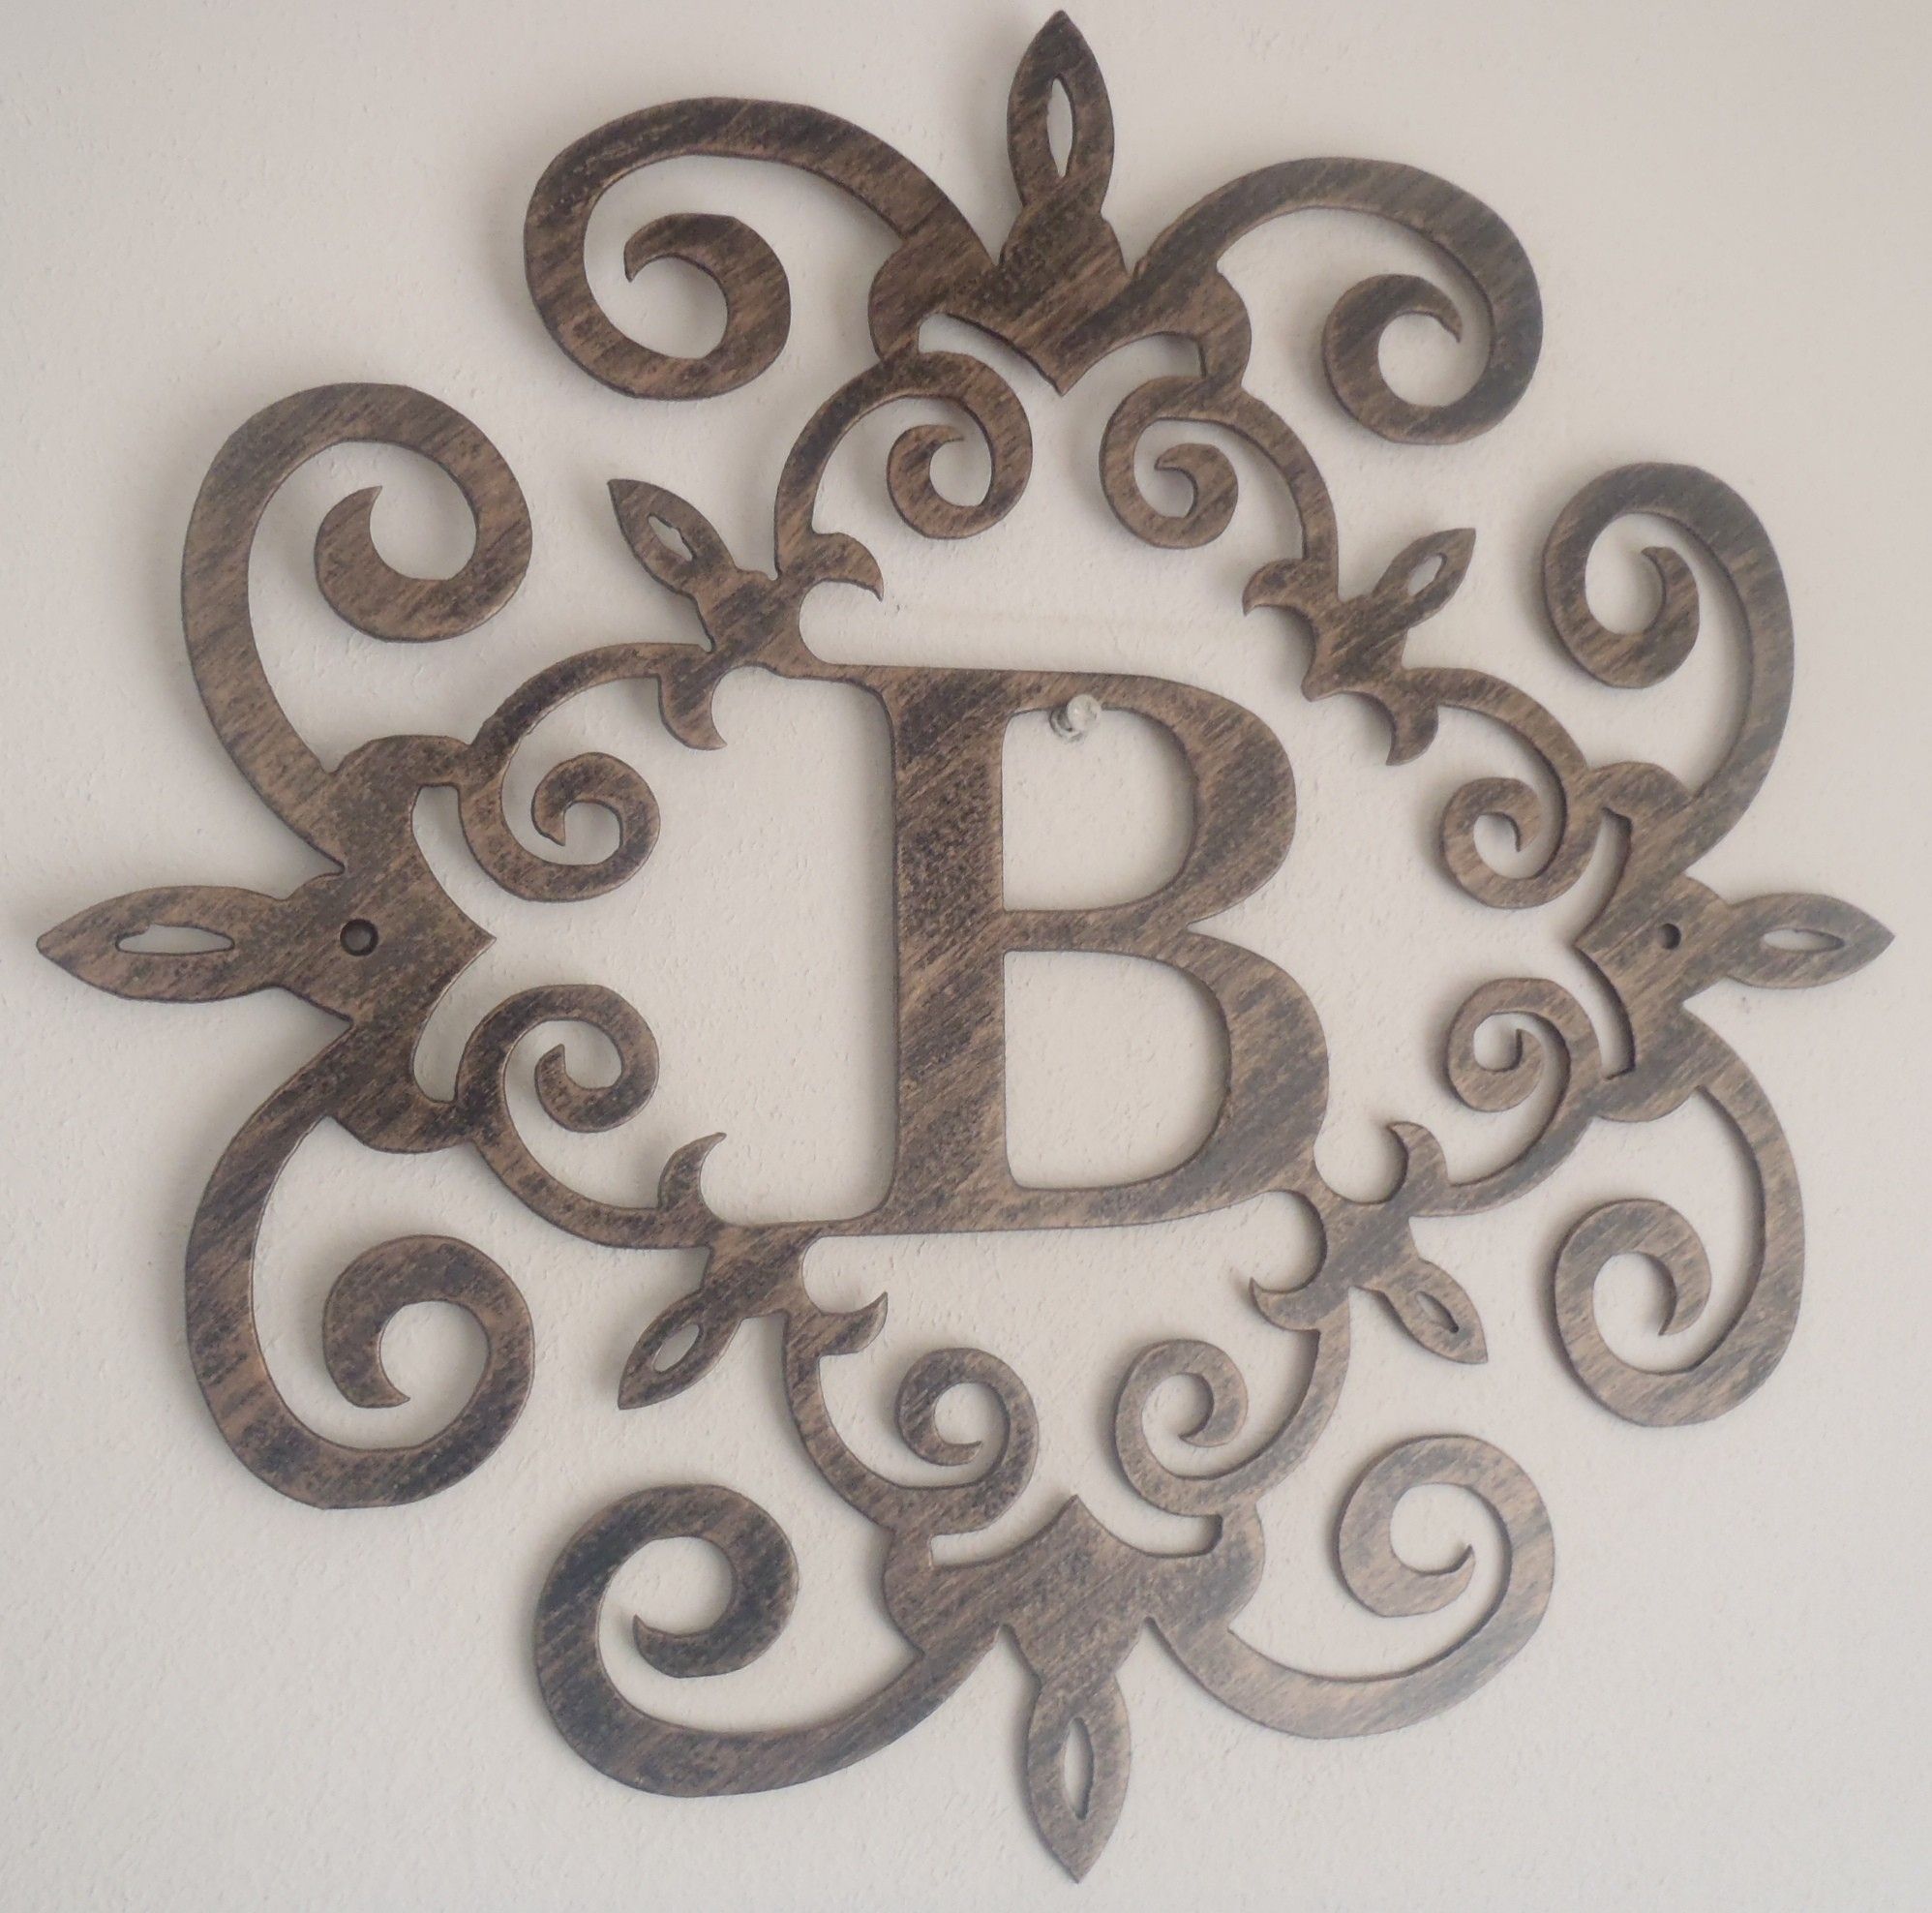 B Large Letters For Wall Decor : Bedroom Large Letters For Wall Regarding Letter Wall Art (View 8 of 20)